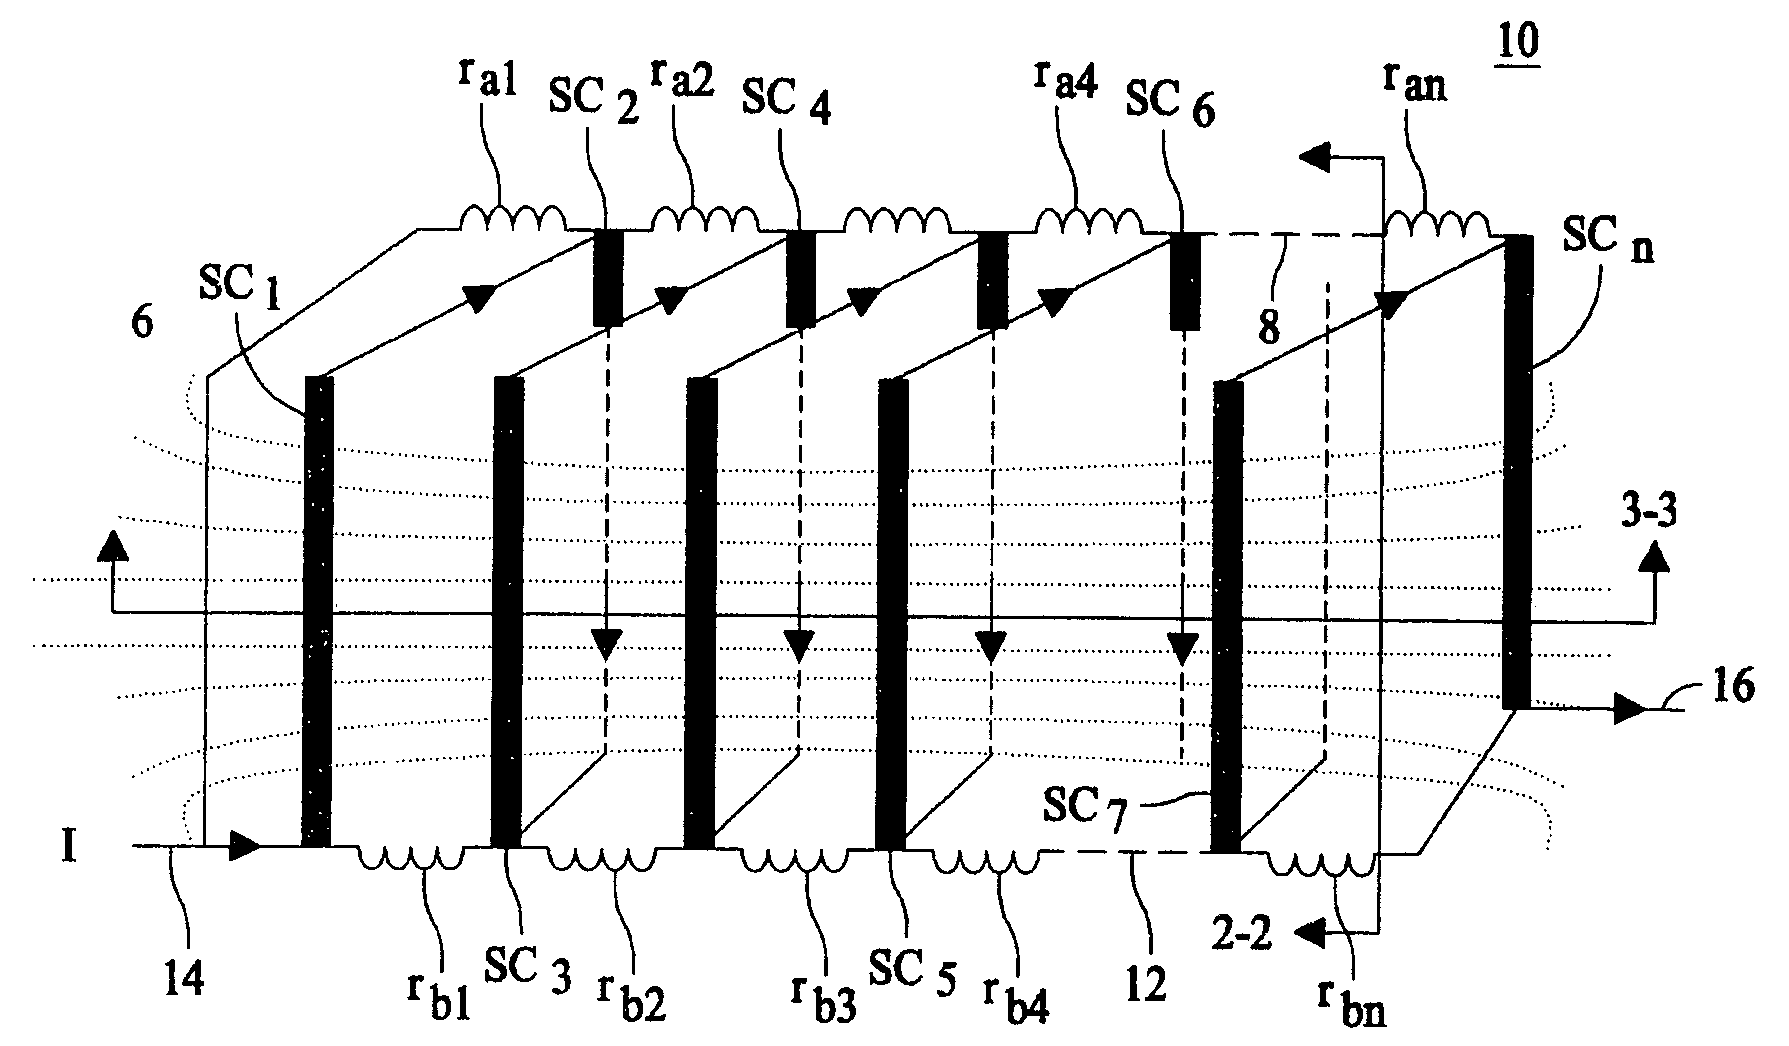 Self field triggered superconducting fault current limiter